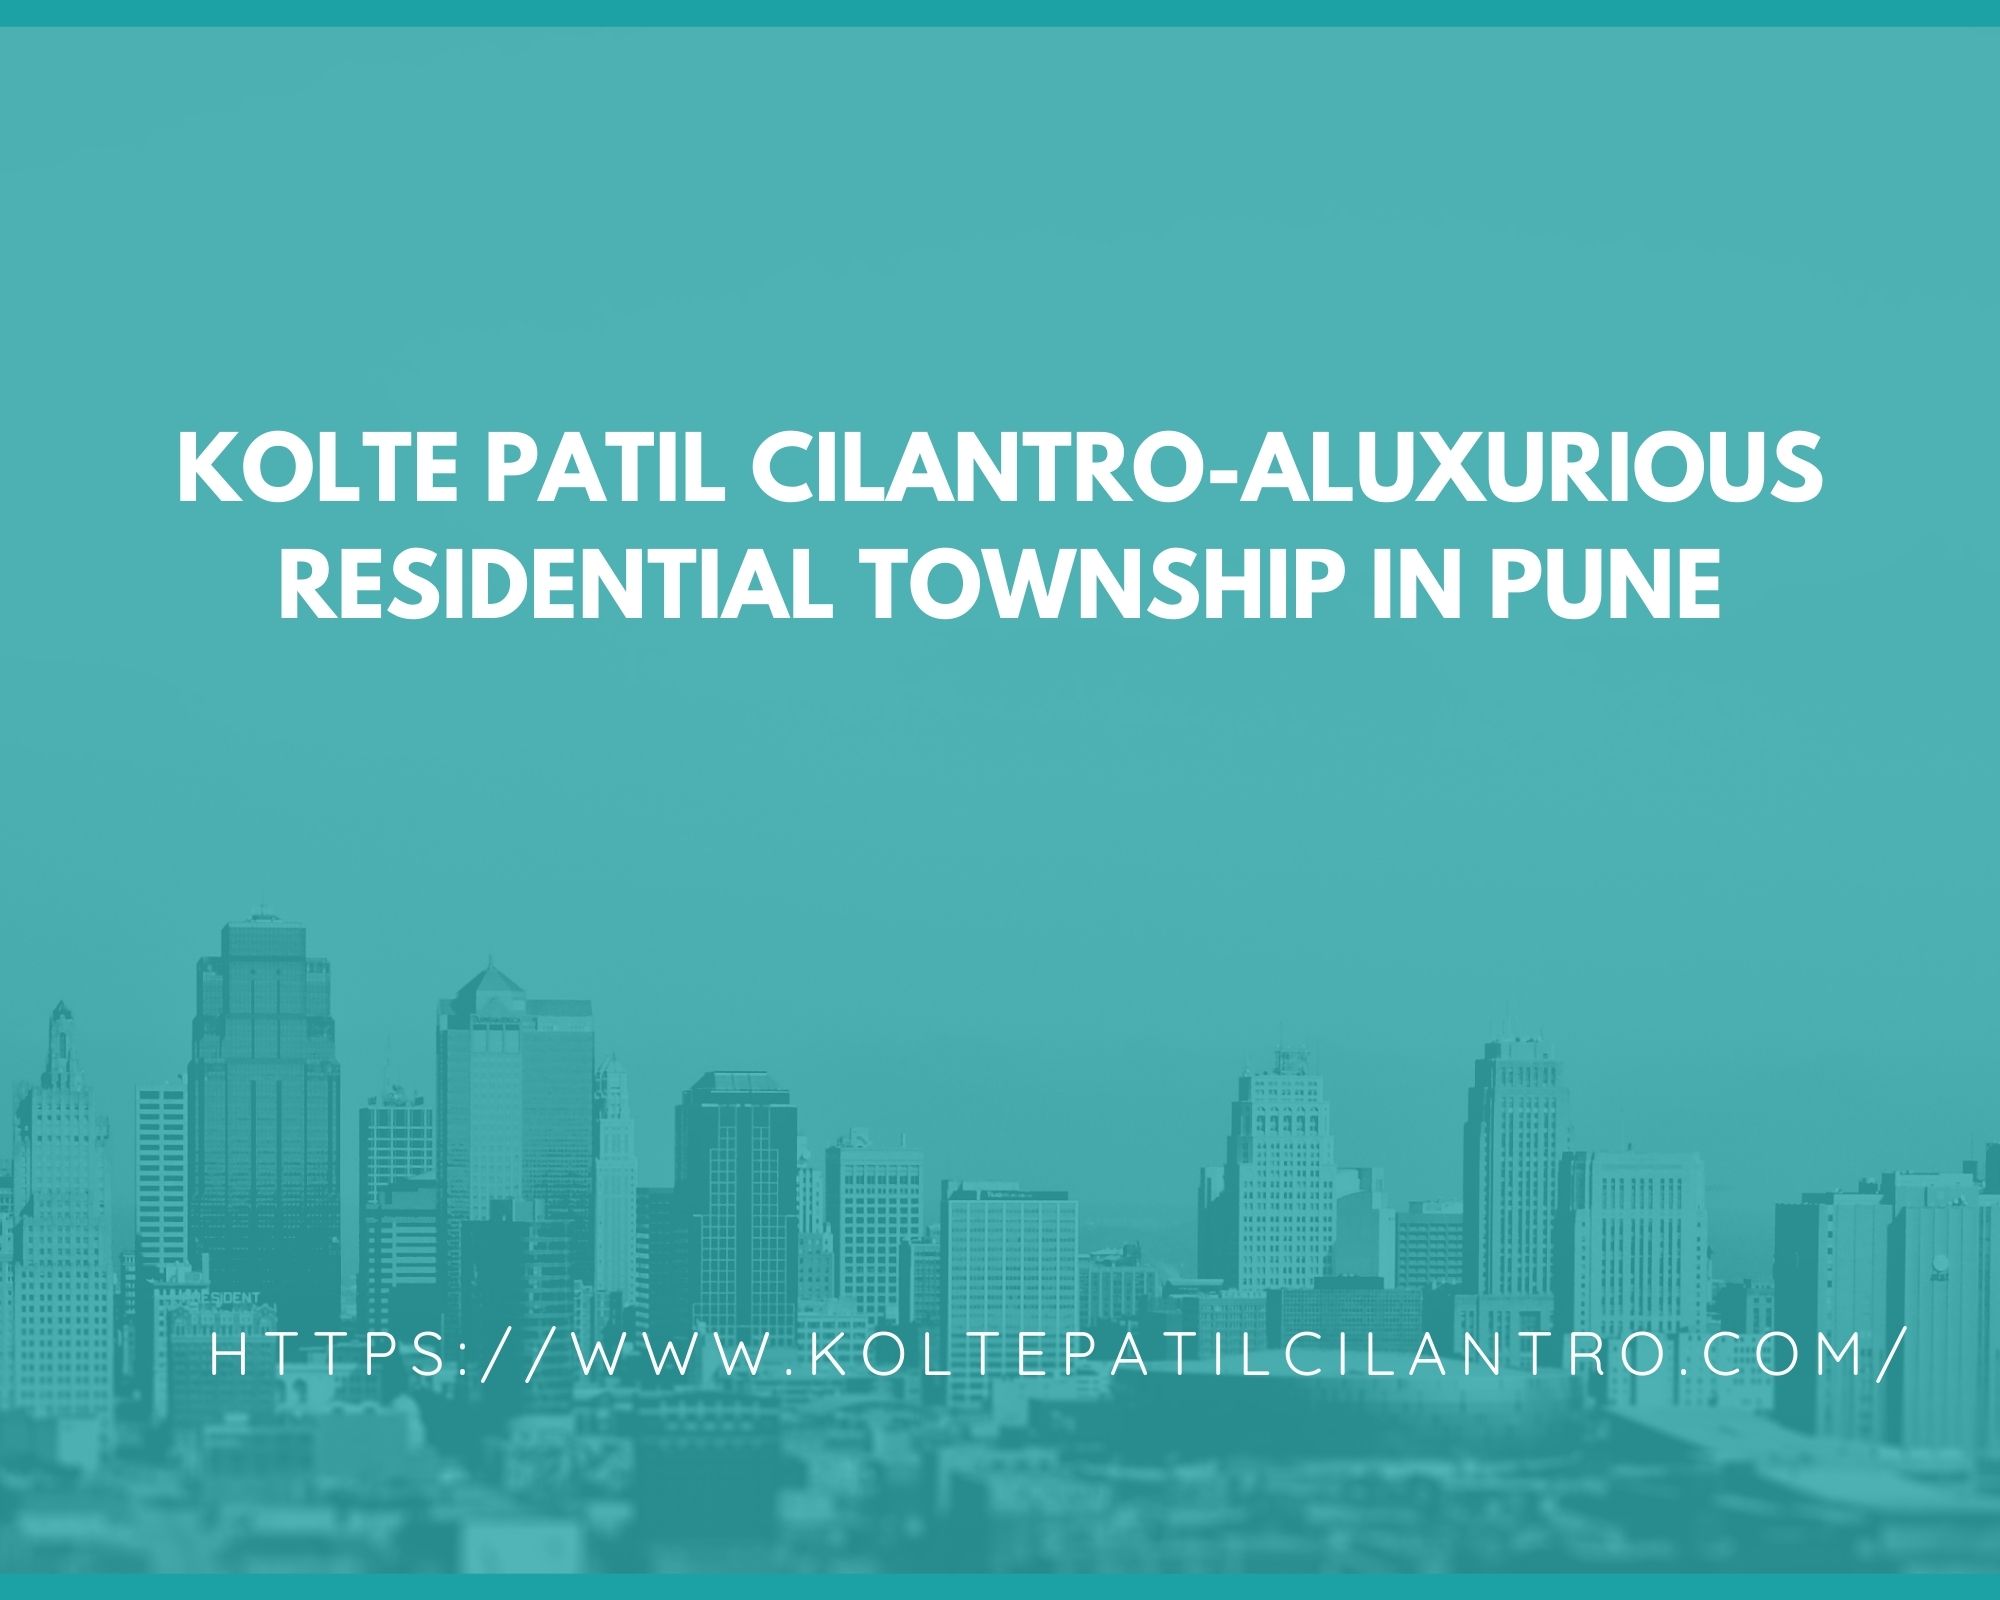 Kolte Patil Cilantro -  A luxurious residential township in Pune